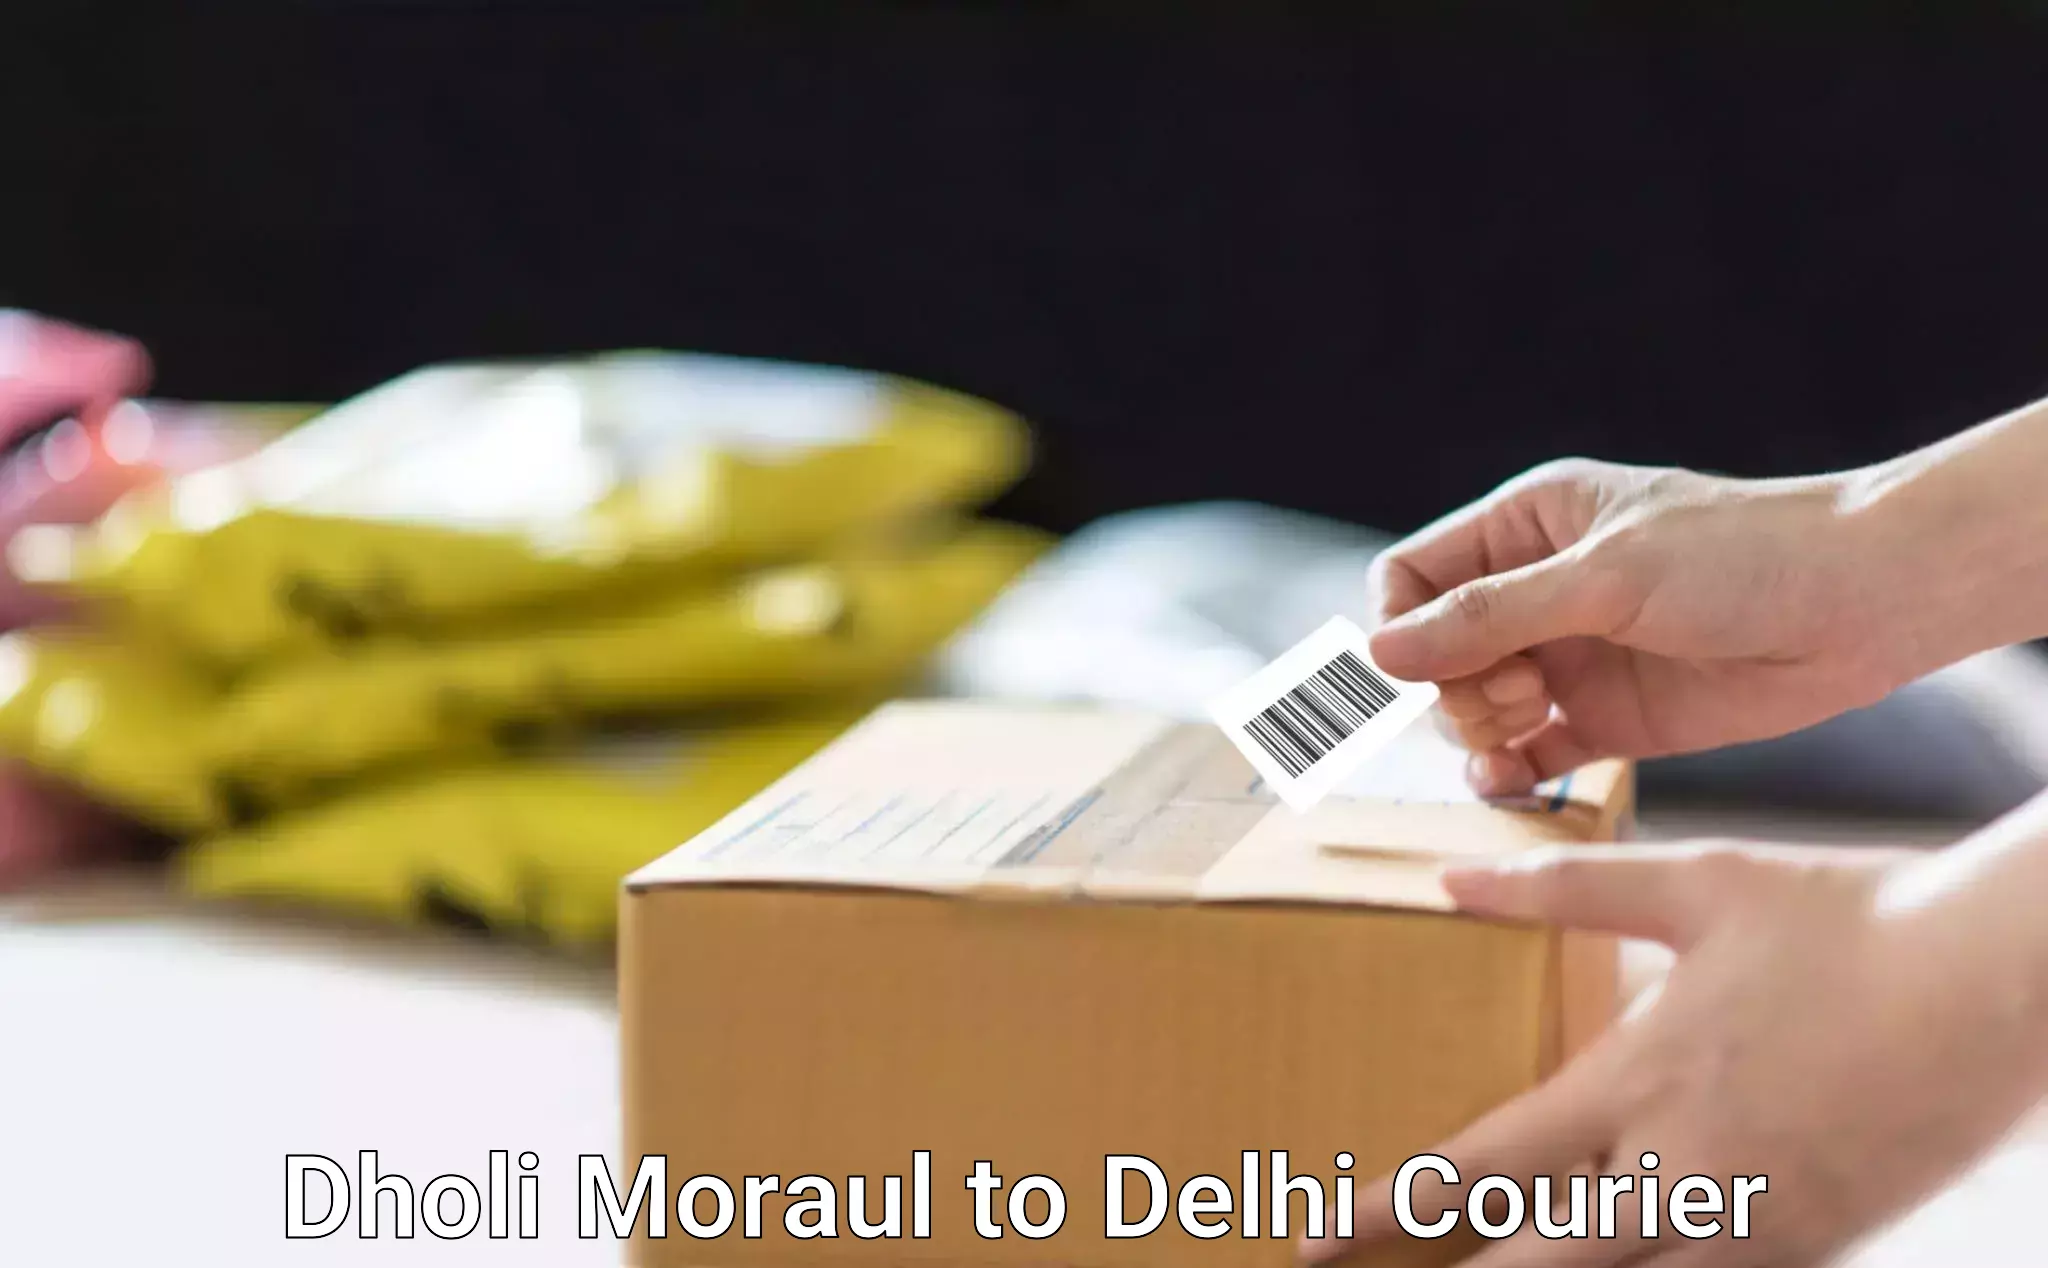 Household goods transport service in Dholi Moraul to NCR